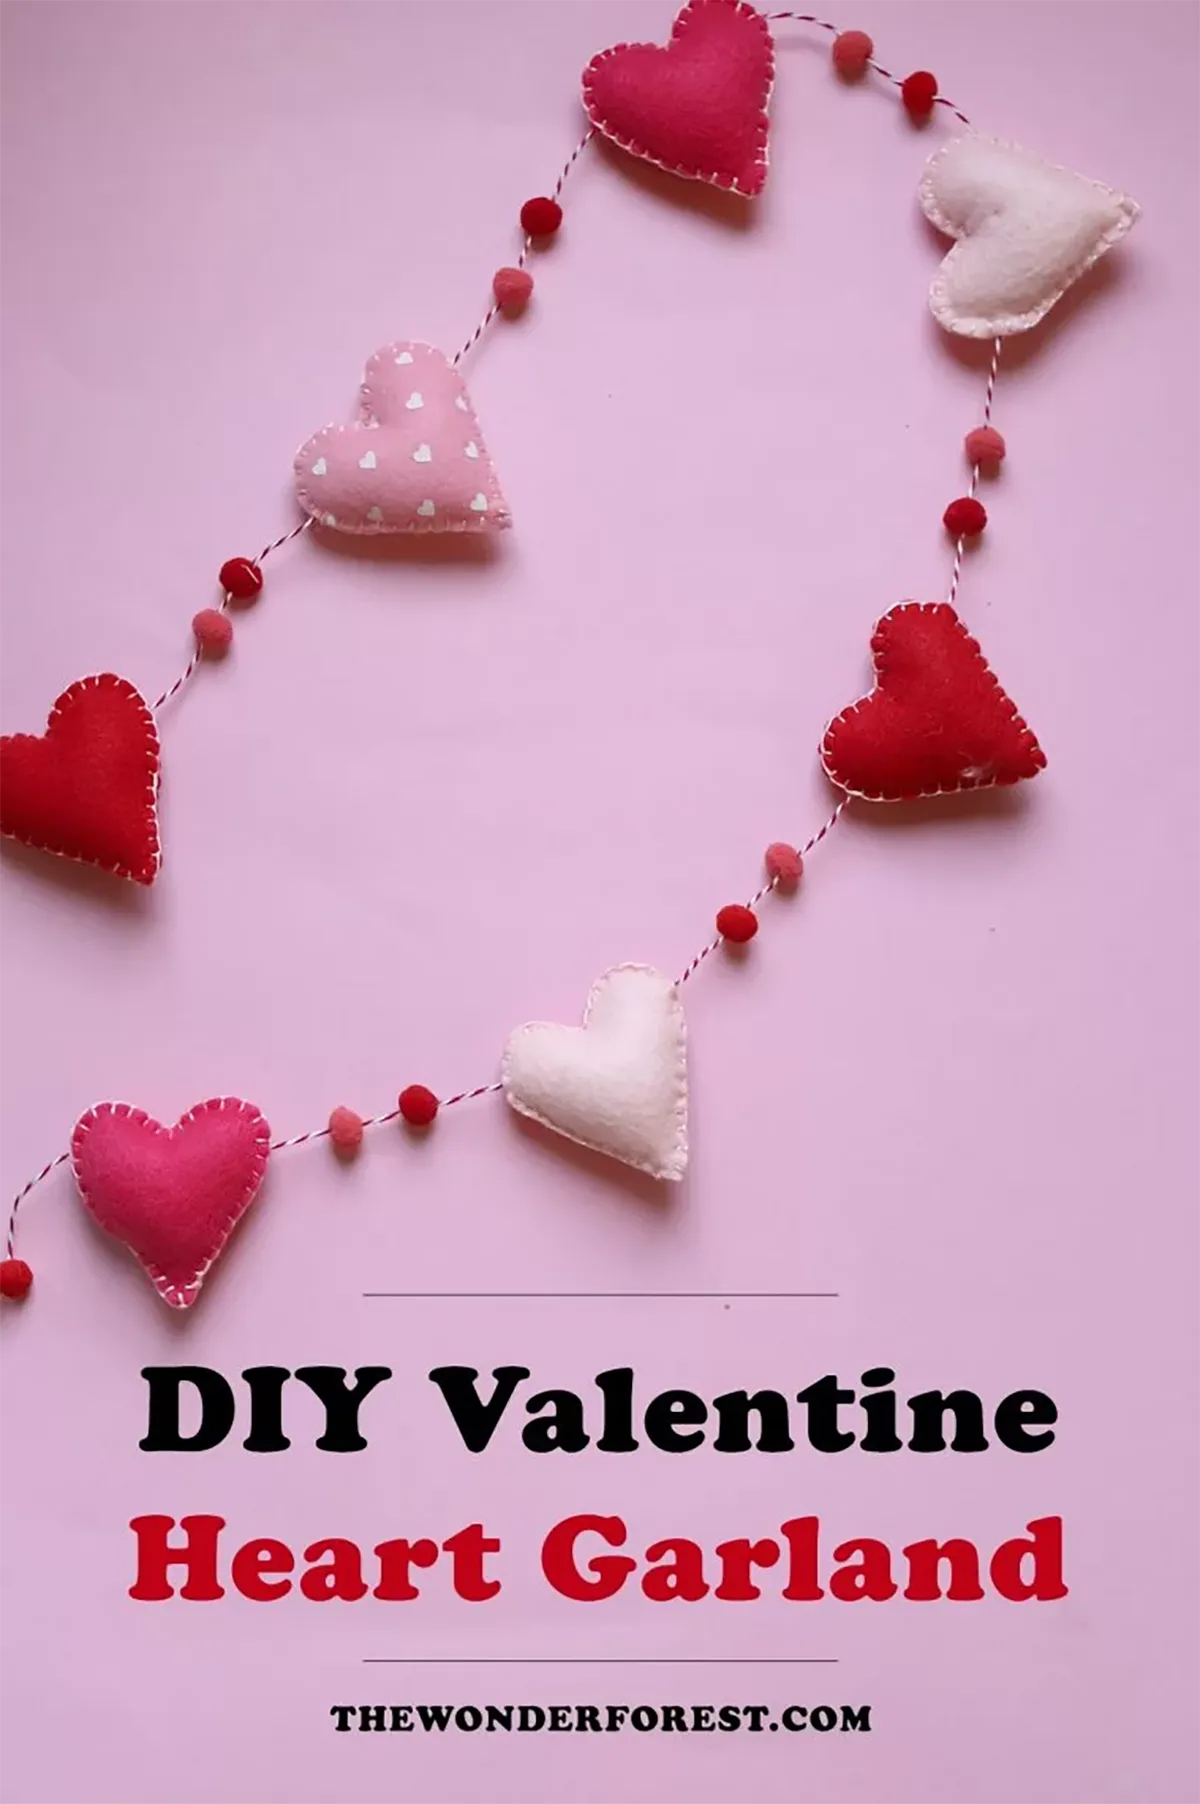 diy valentines decorations - heart garland on a pink background